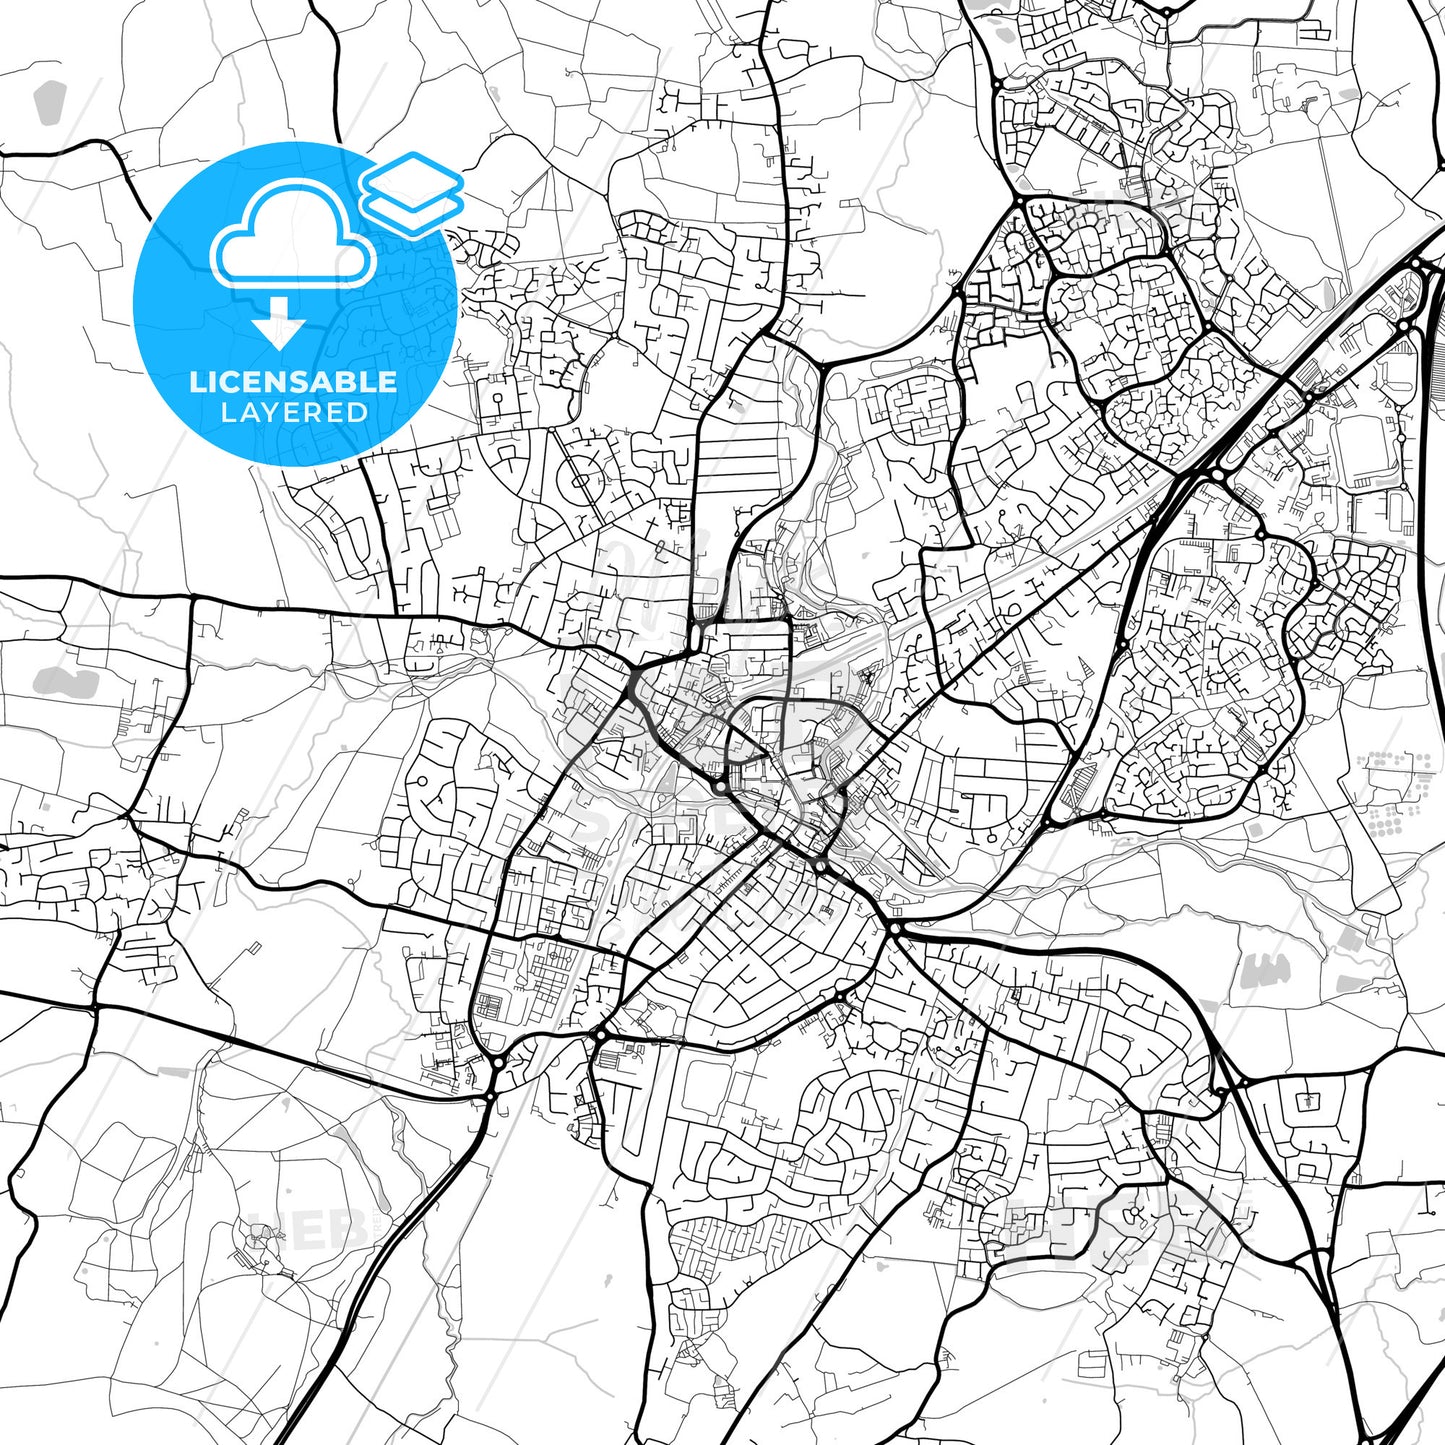 Layered PDF map of Chelmsford, East of England, England